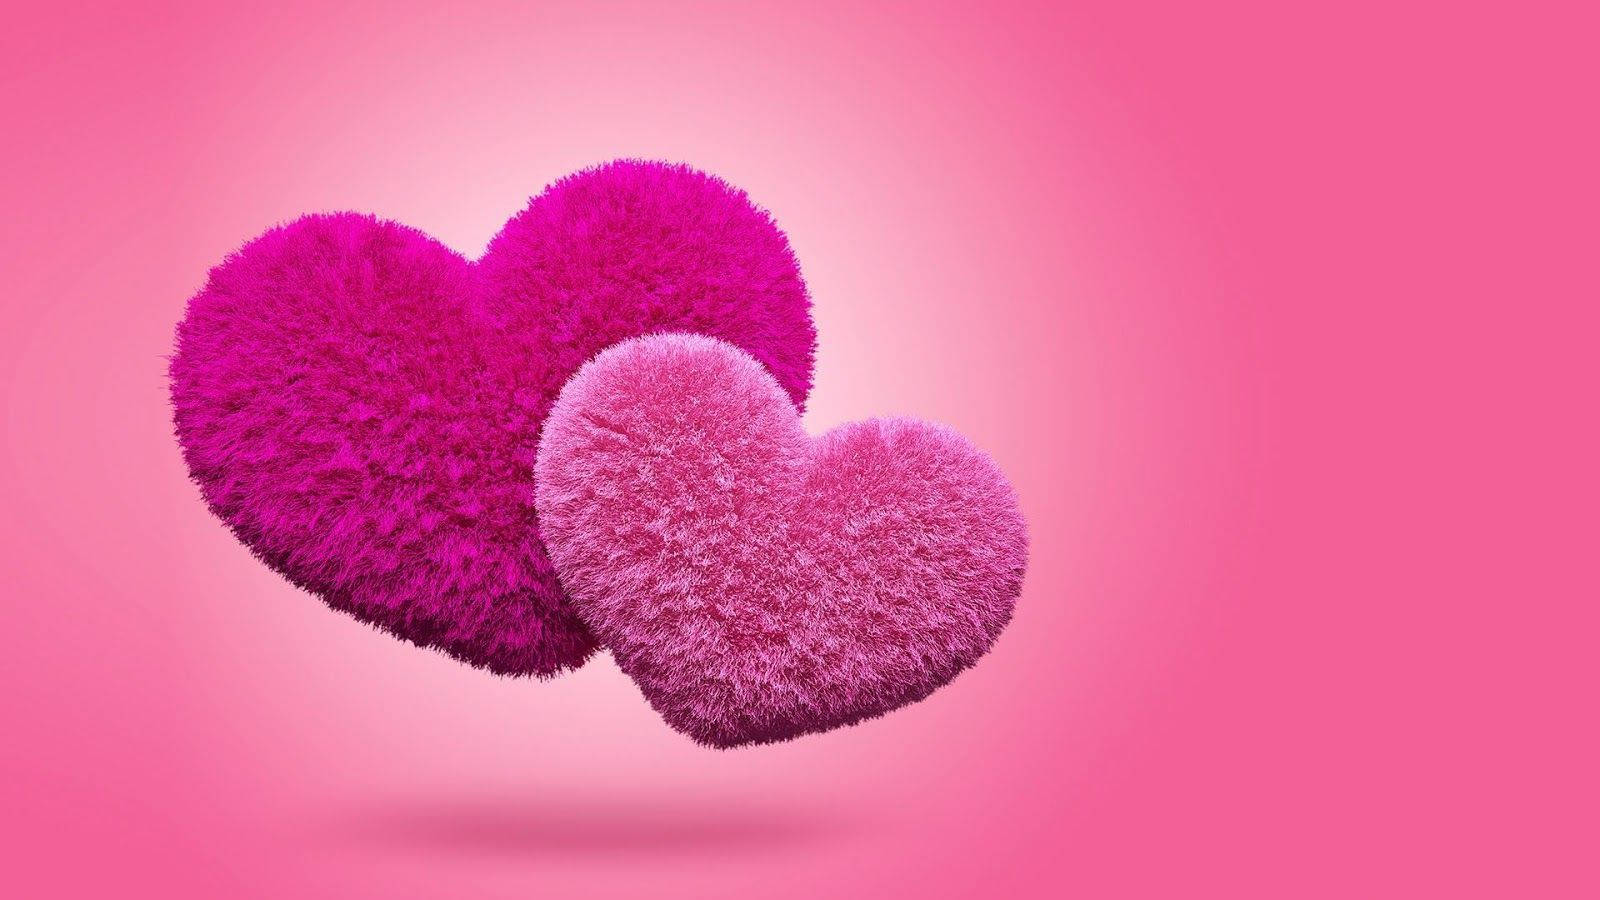 Cute Heart With Fur Pink Aesthetic Wallpaper